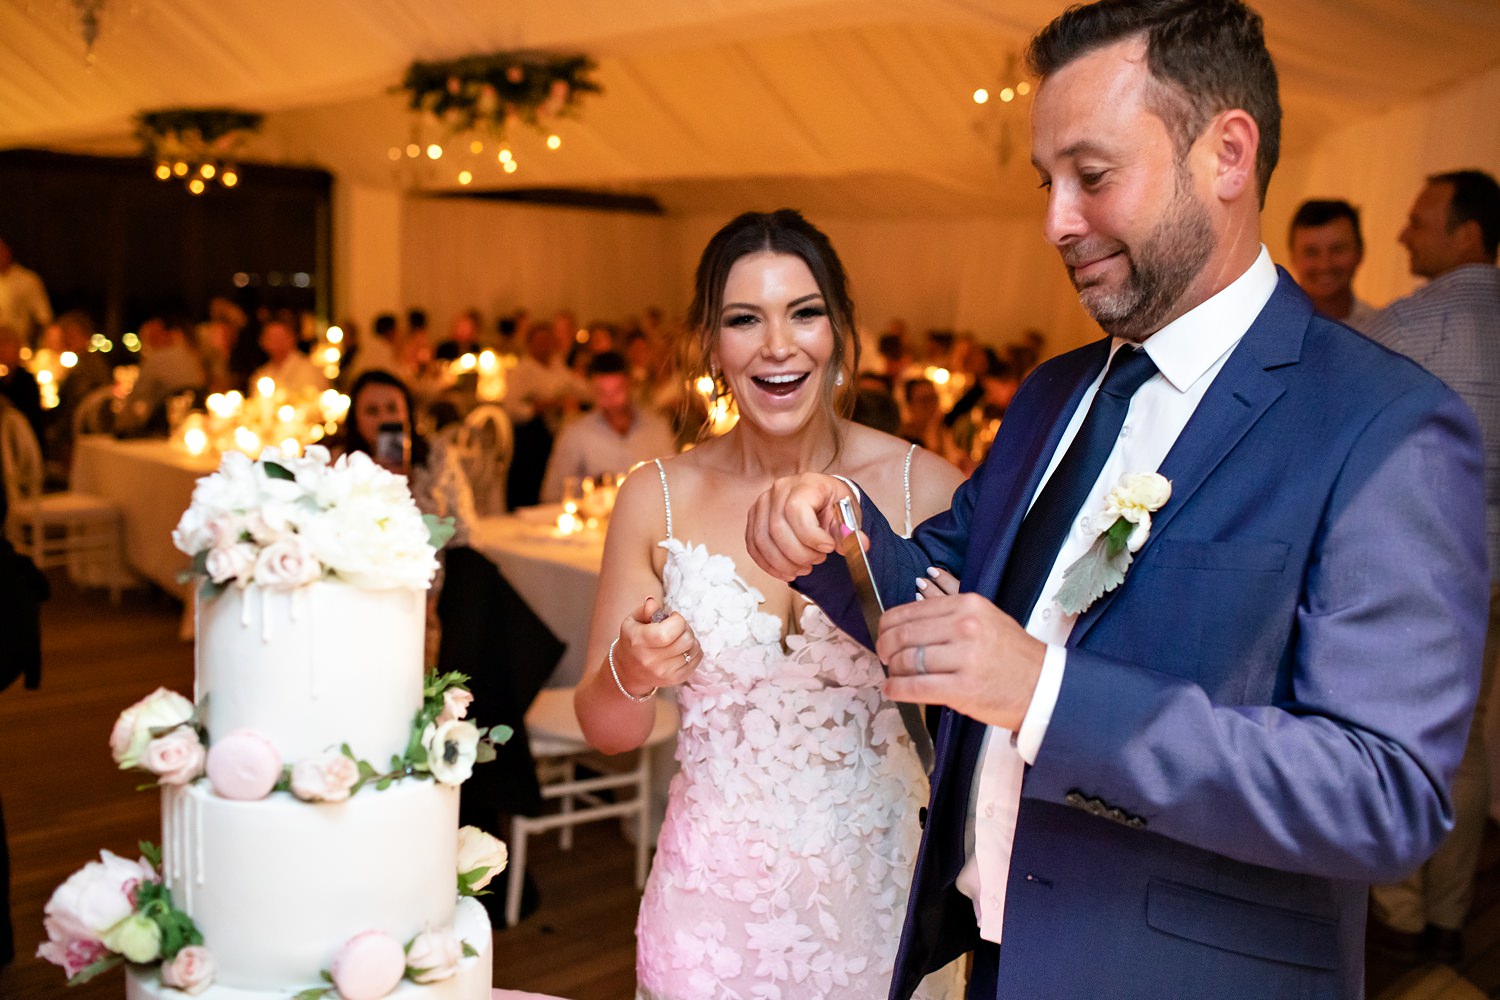 Bride laughs at groom who broke the knife whilst cutting the classic wedding cake with macarons at their wedding reception at St Francis Links